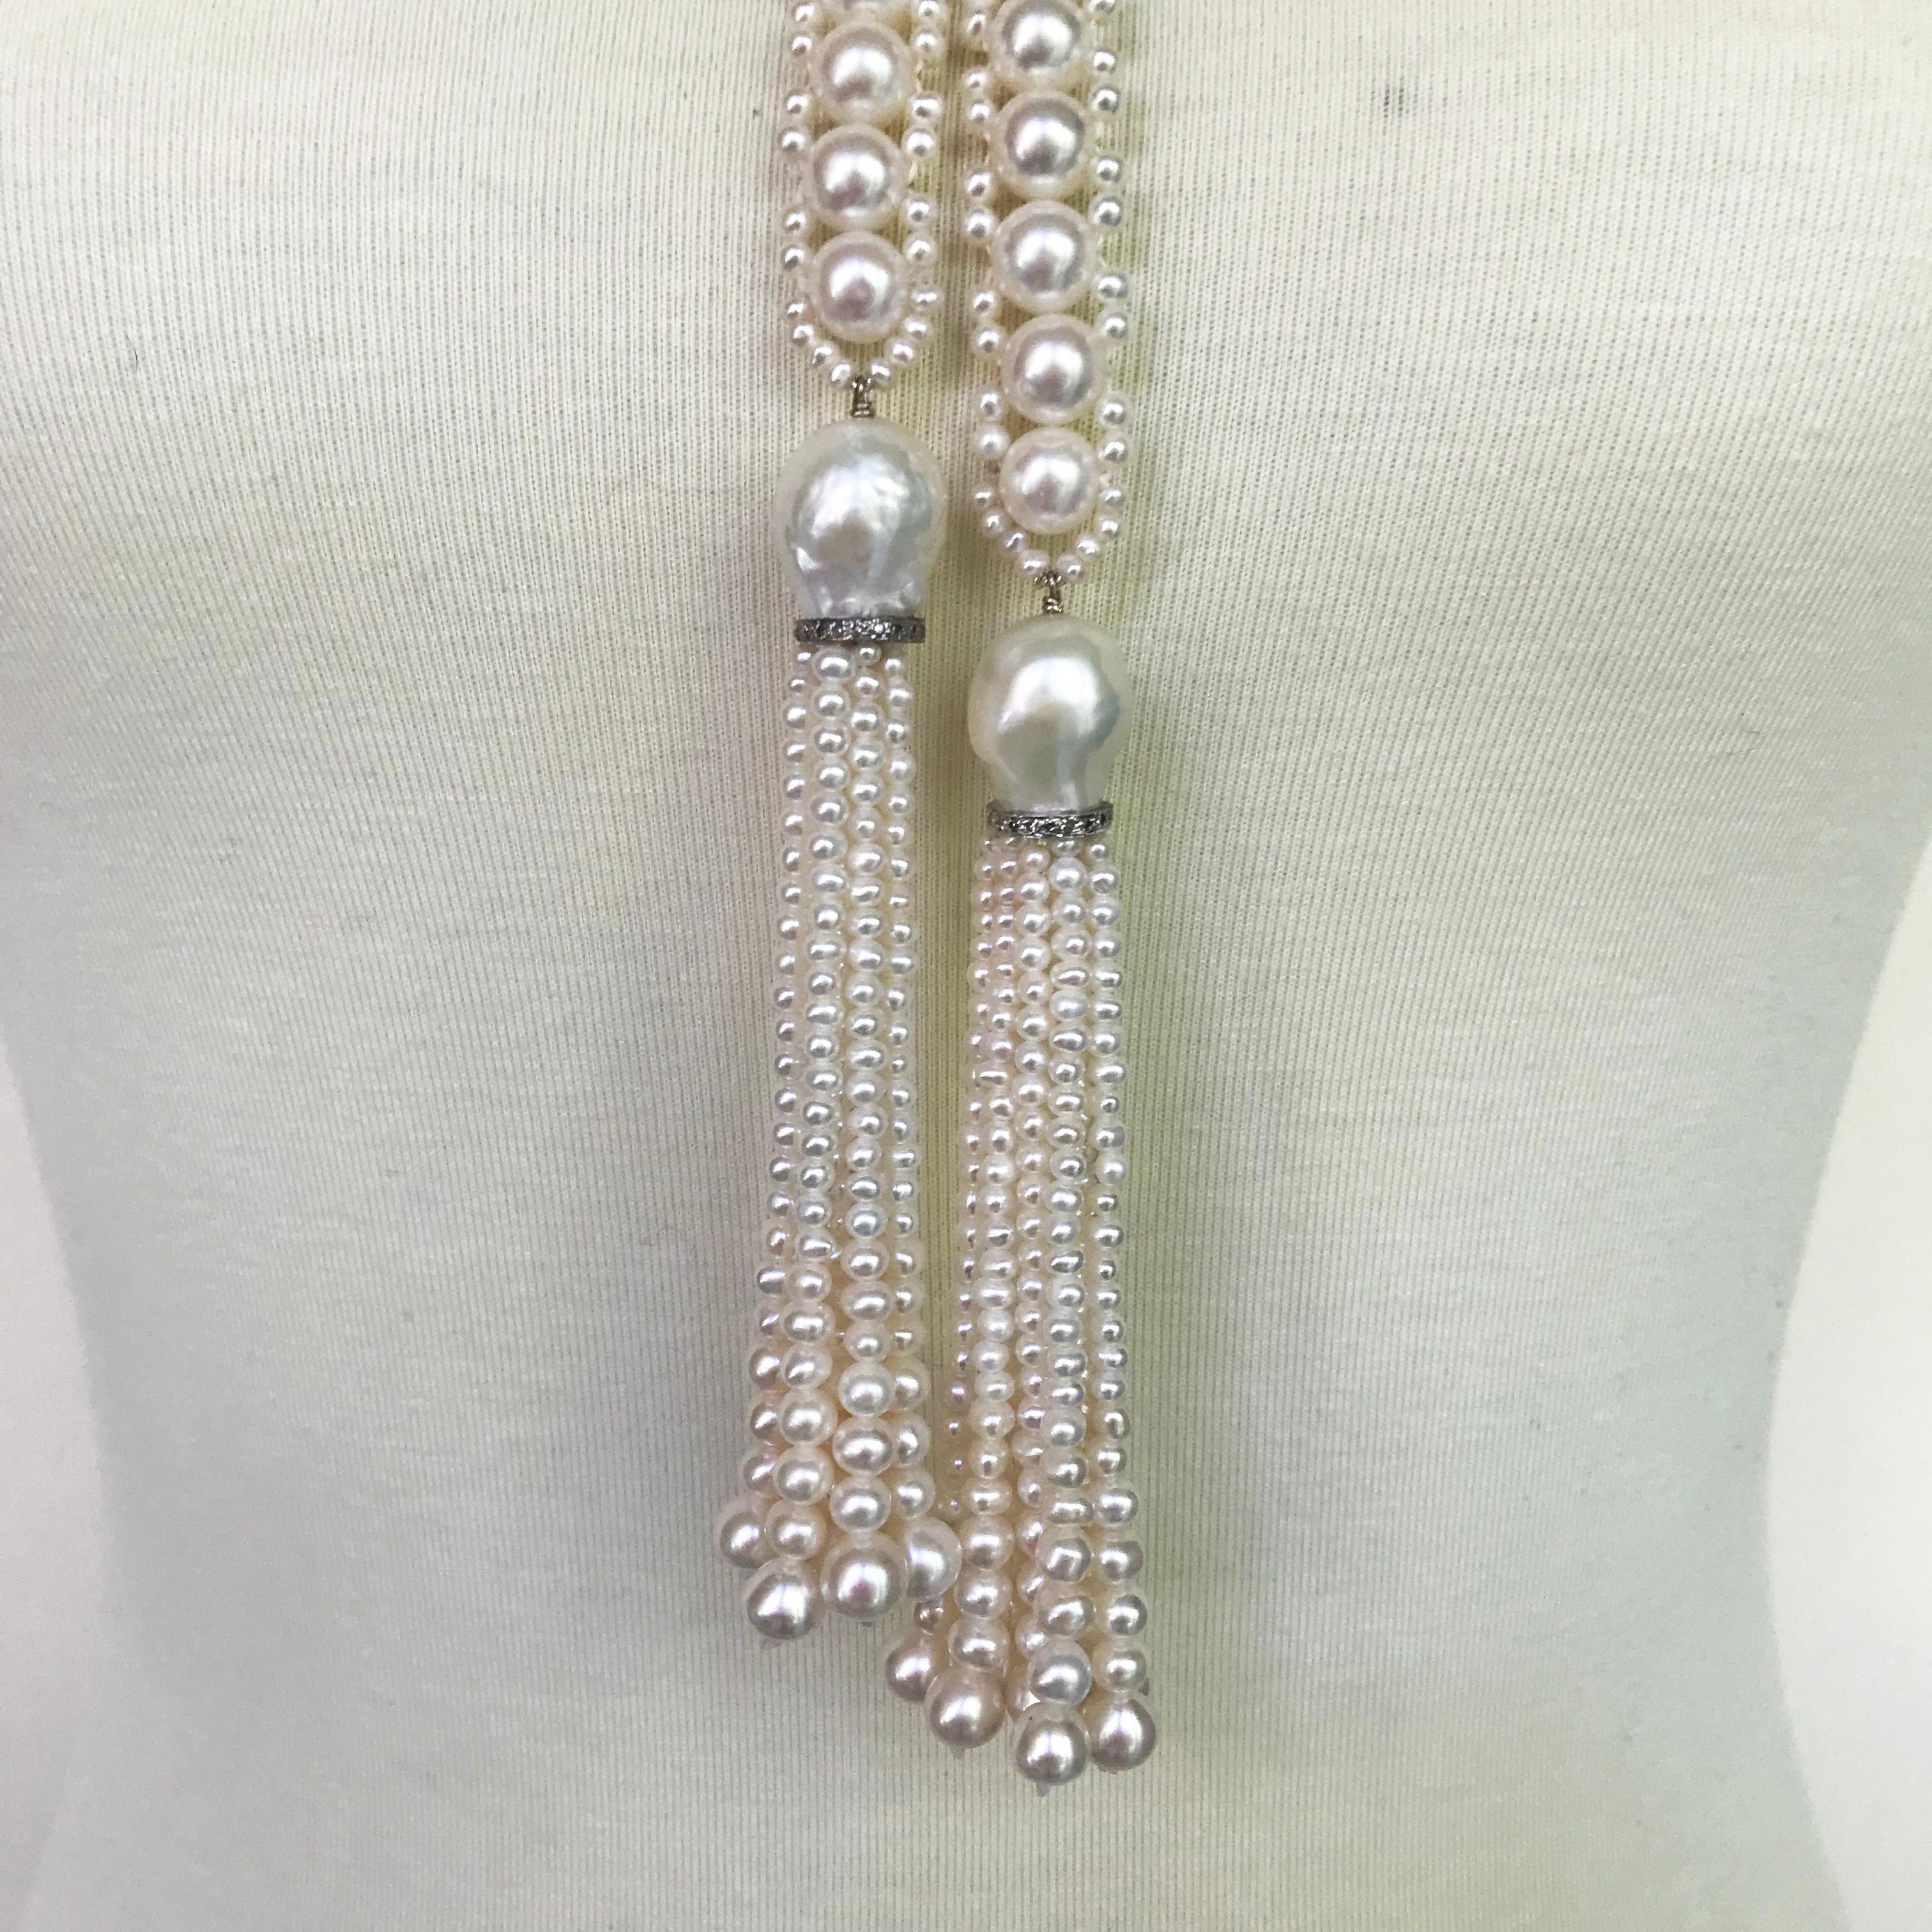 This white pearl rope sautoir necklace with white pearl and diamond tassels is the essence of classic elegance. Handcrafted by Marina J. each pearl was chosen for its beautiful shape and glowing white color. The rope like design is graceful and